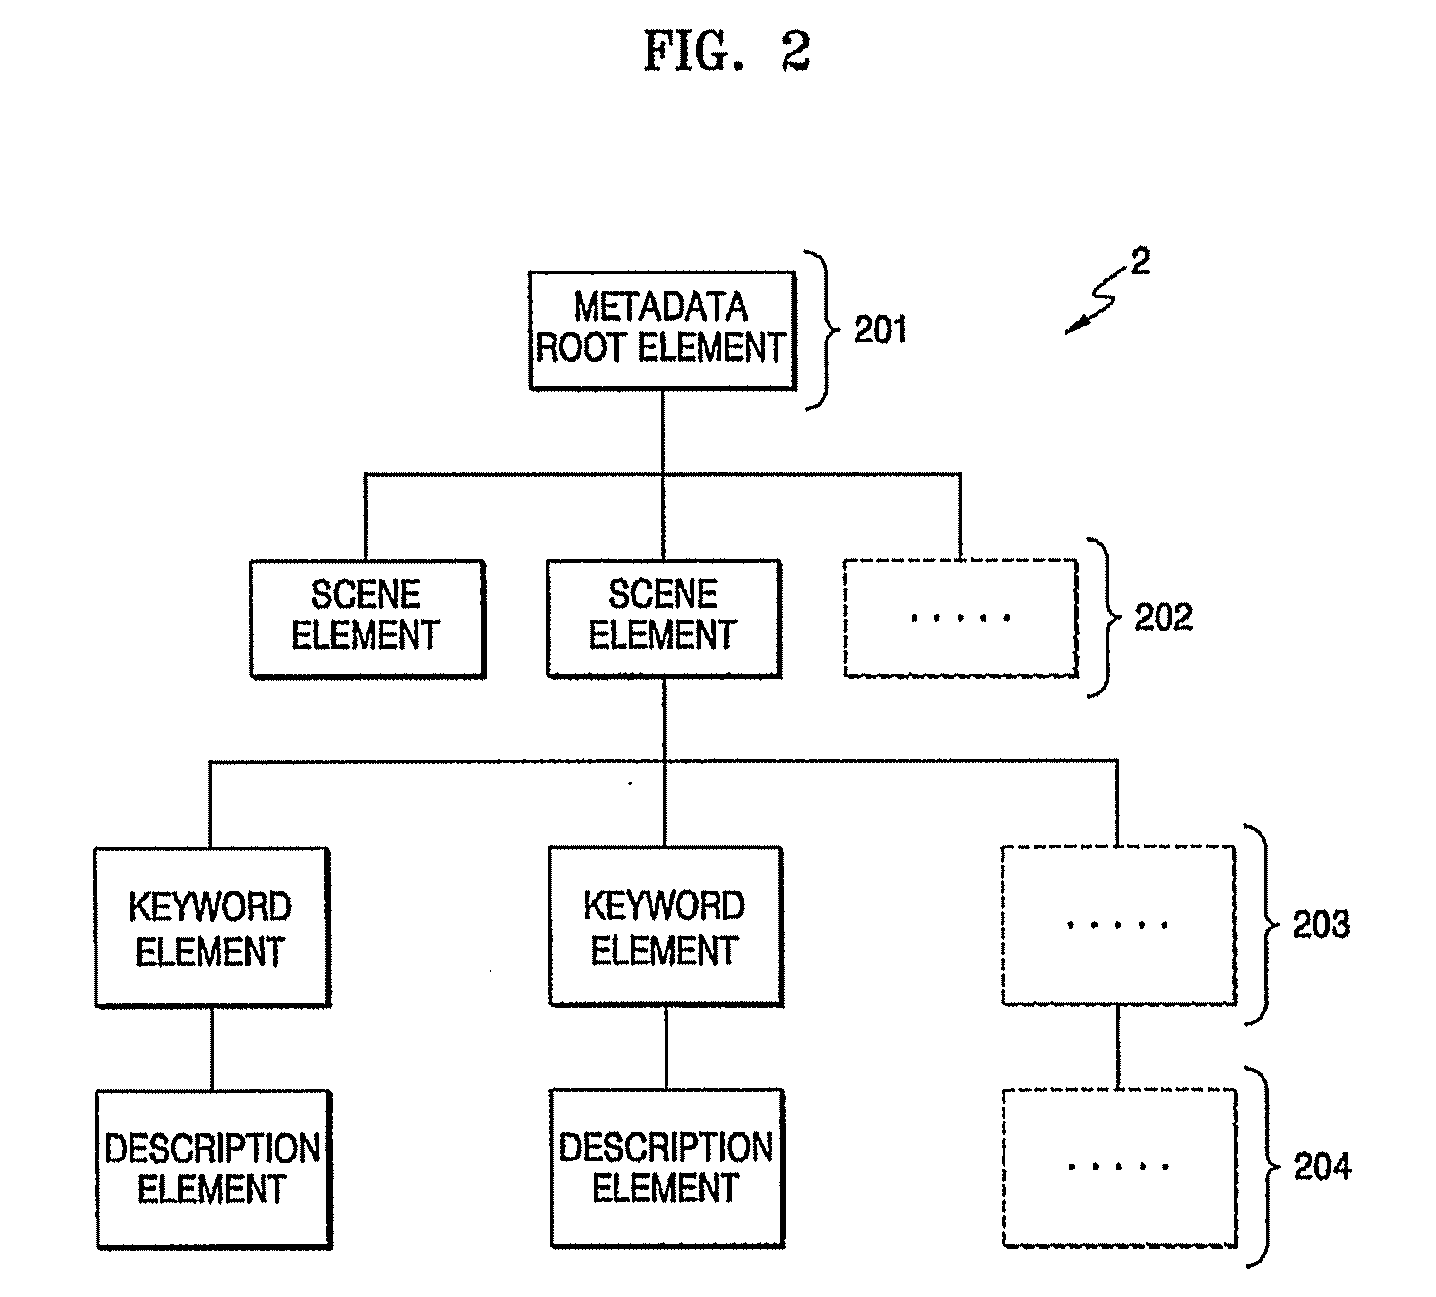 Storage medium including metadata and reproduction apparatus and method therefor